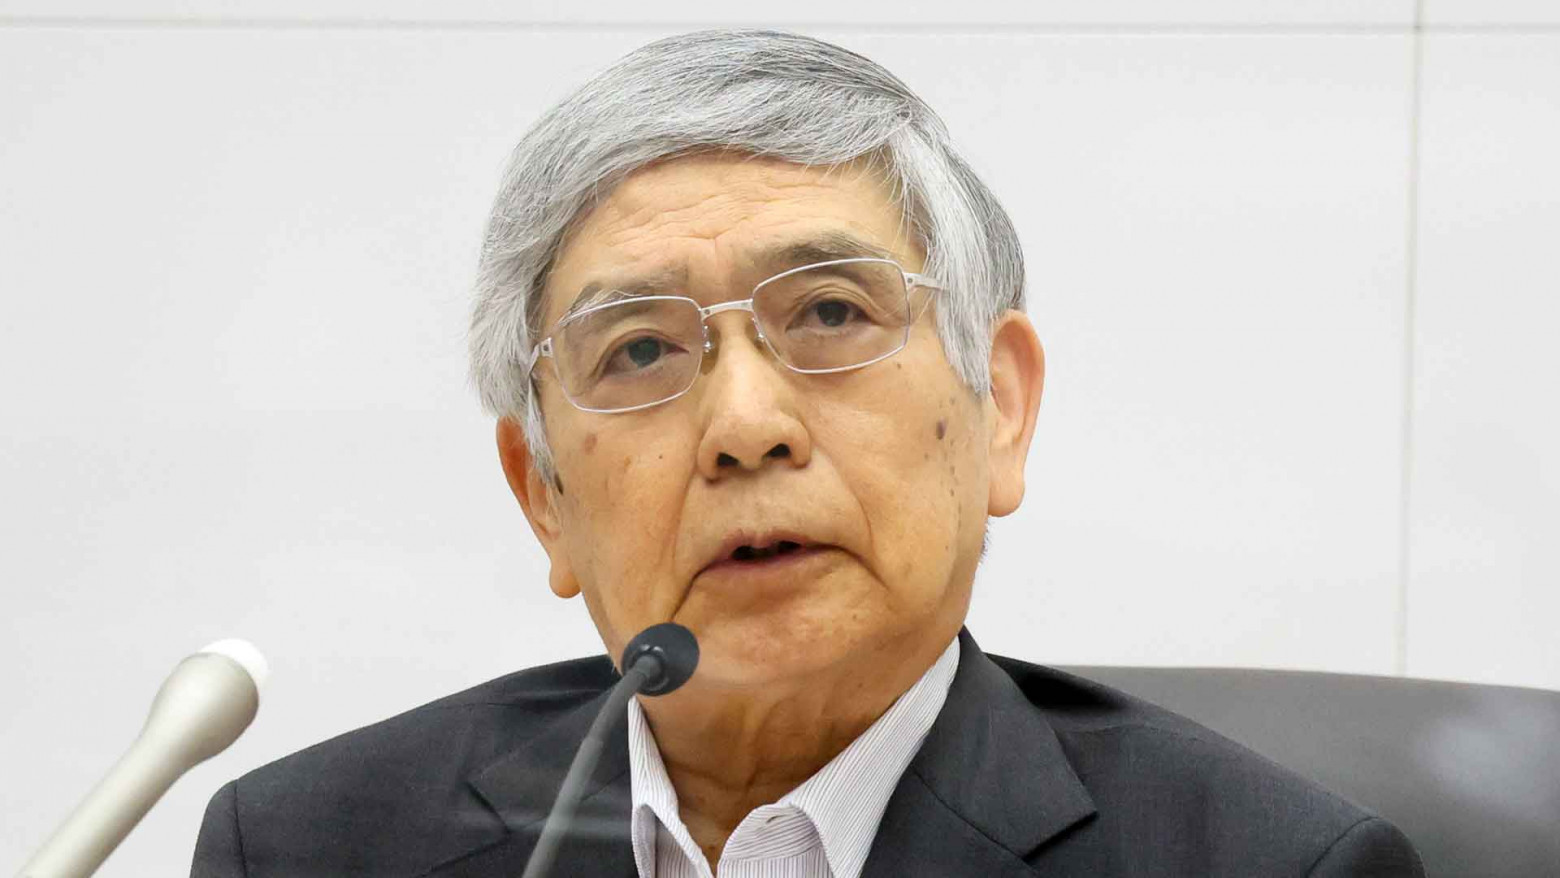 BOJ’s Longest-serving Governor: The impact of ‘different dimension’ monetary policy